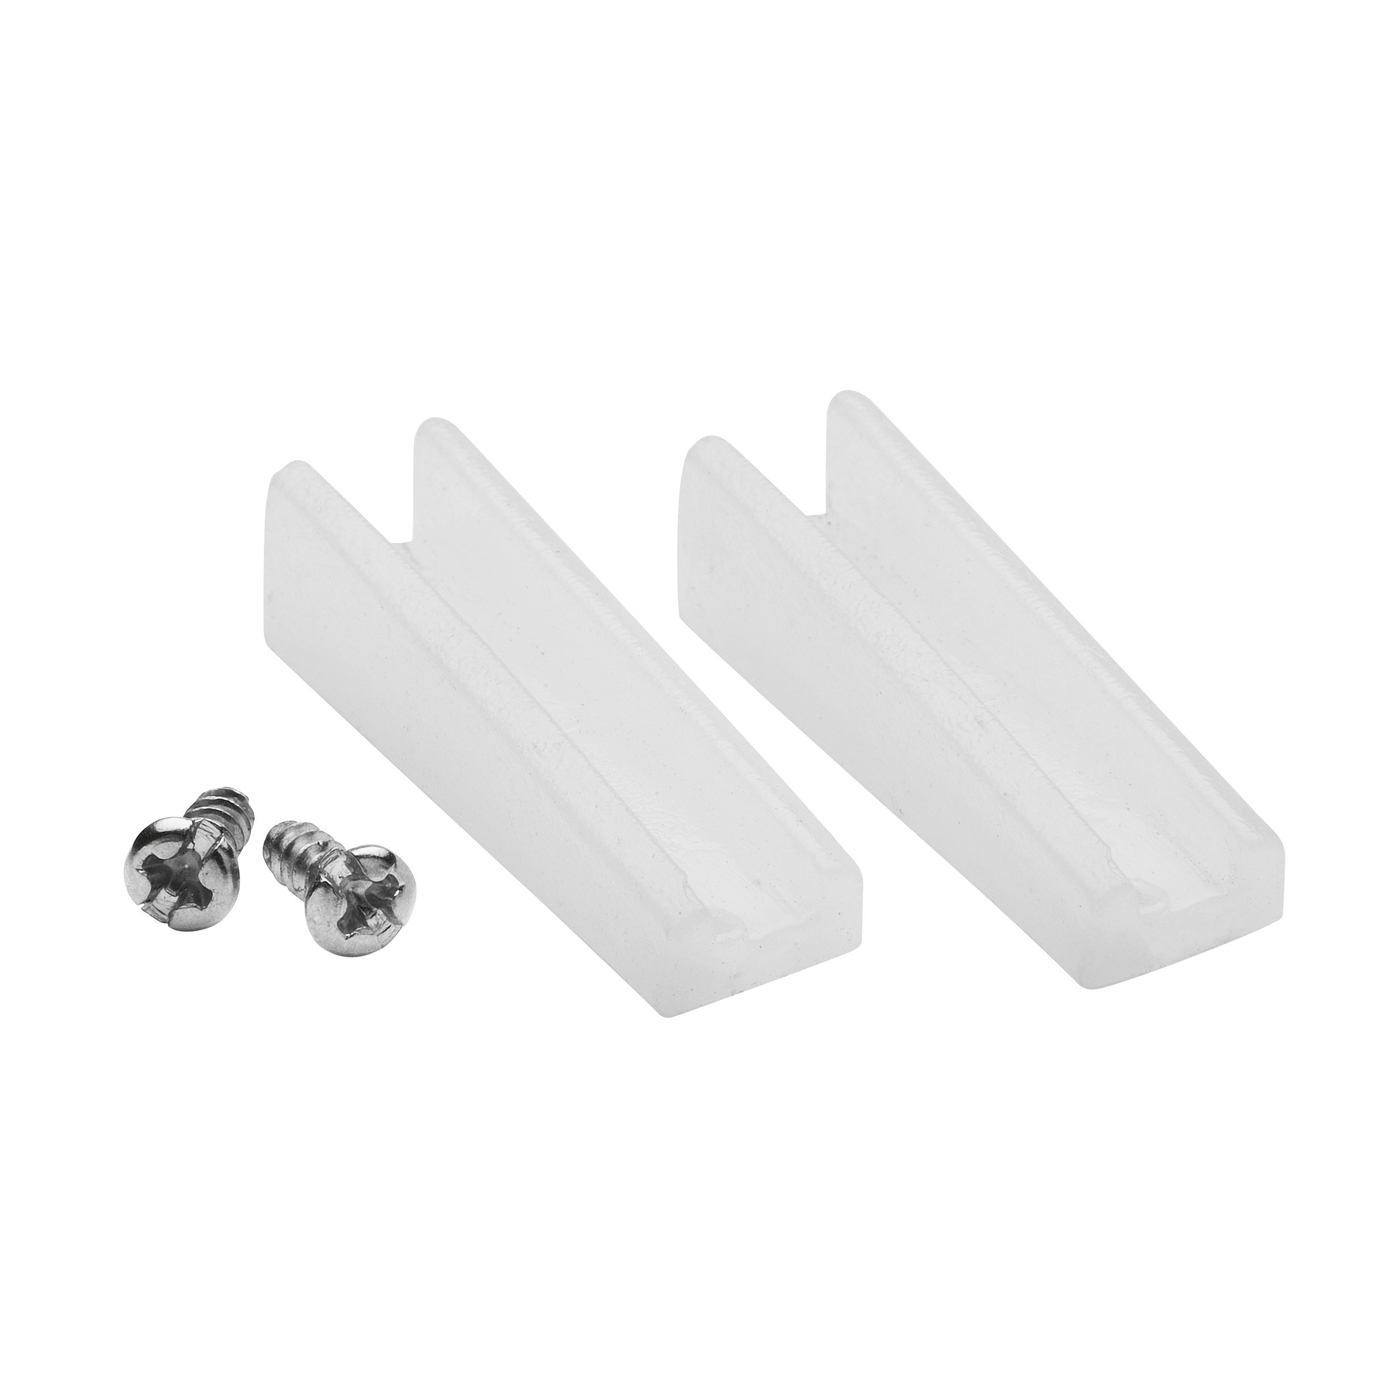 Replacement Nylon Jaws, 12 mm - 2 pieces